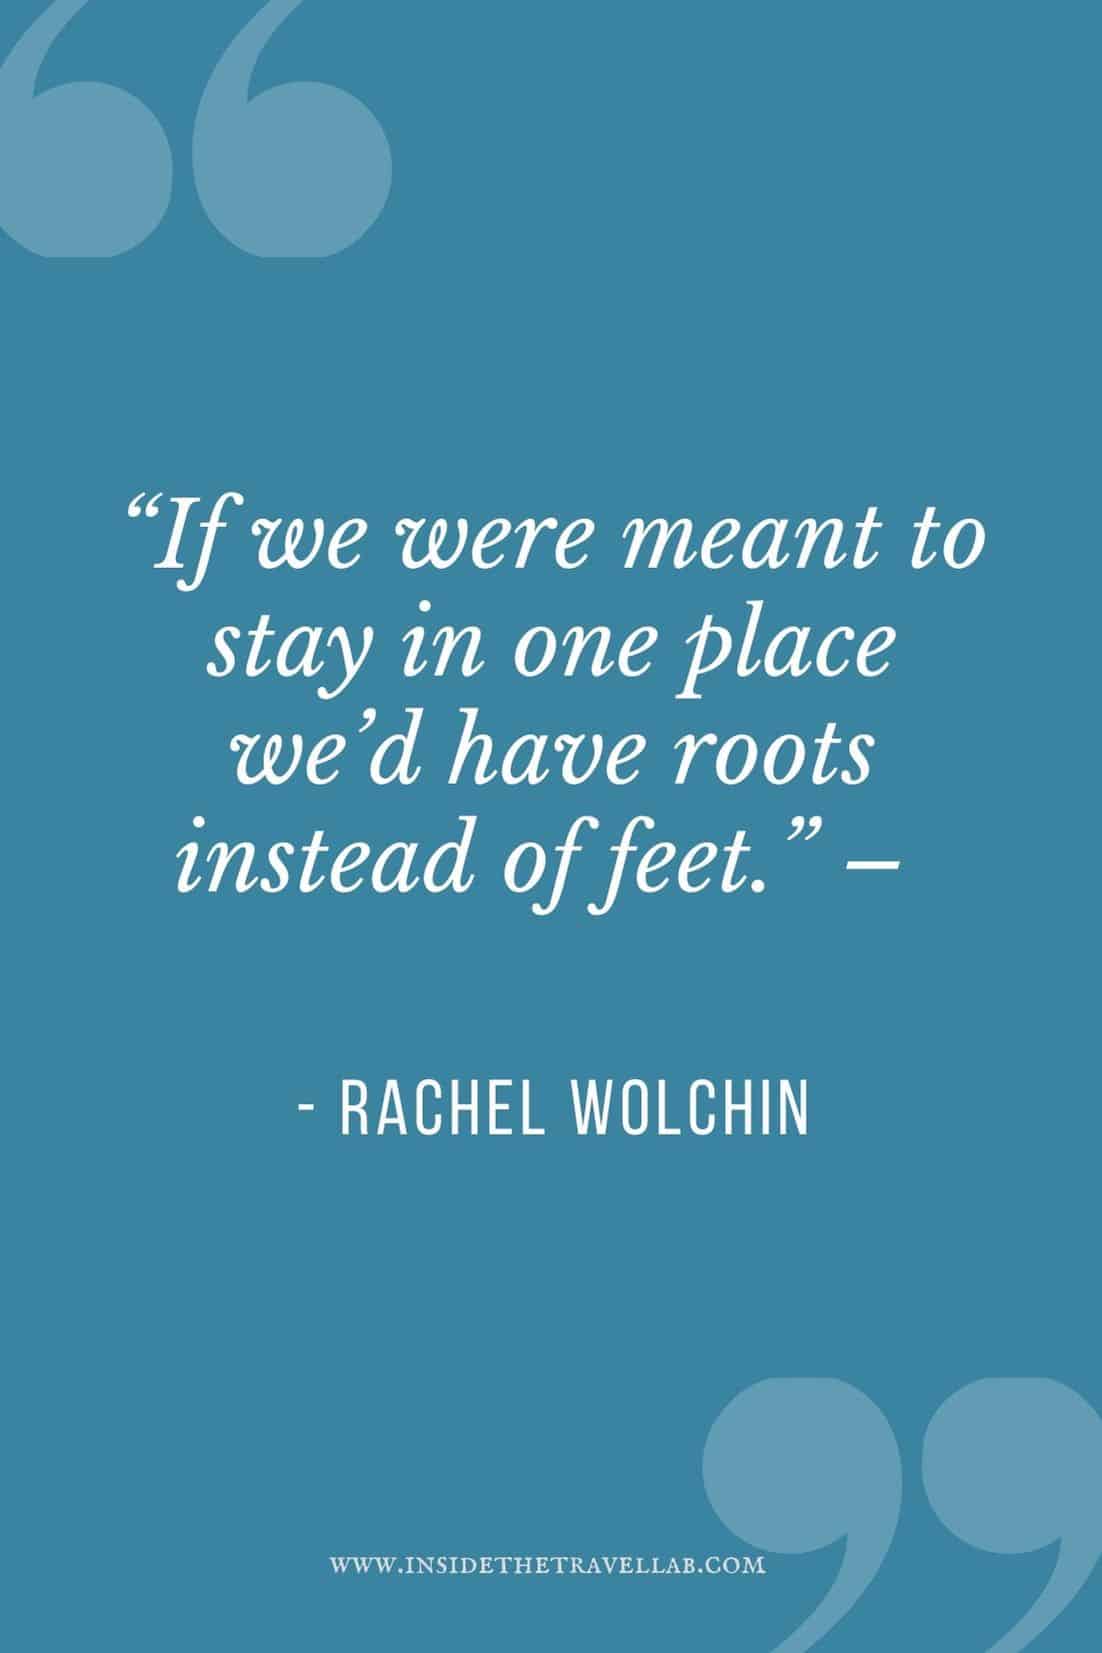 If we were meant to stay in one place we'd have roots instead of feet